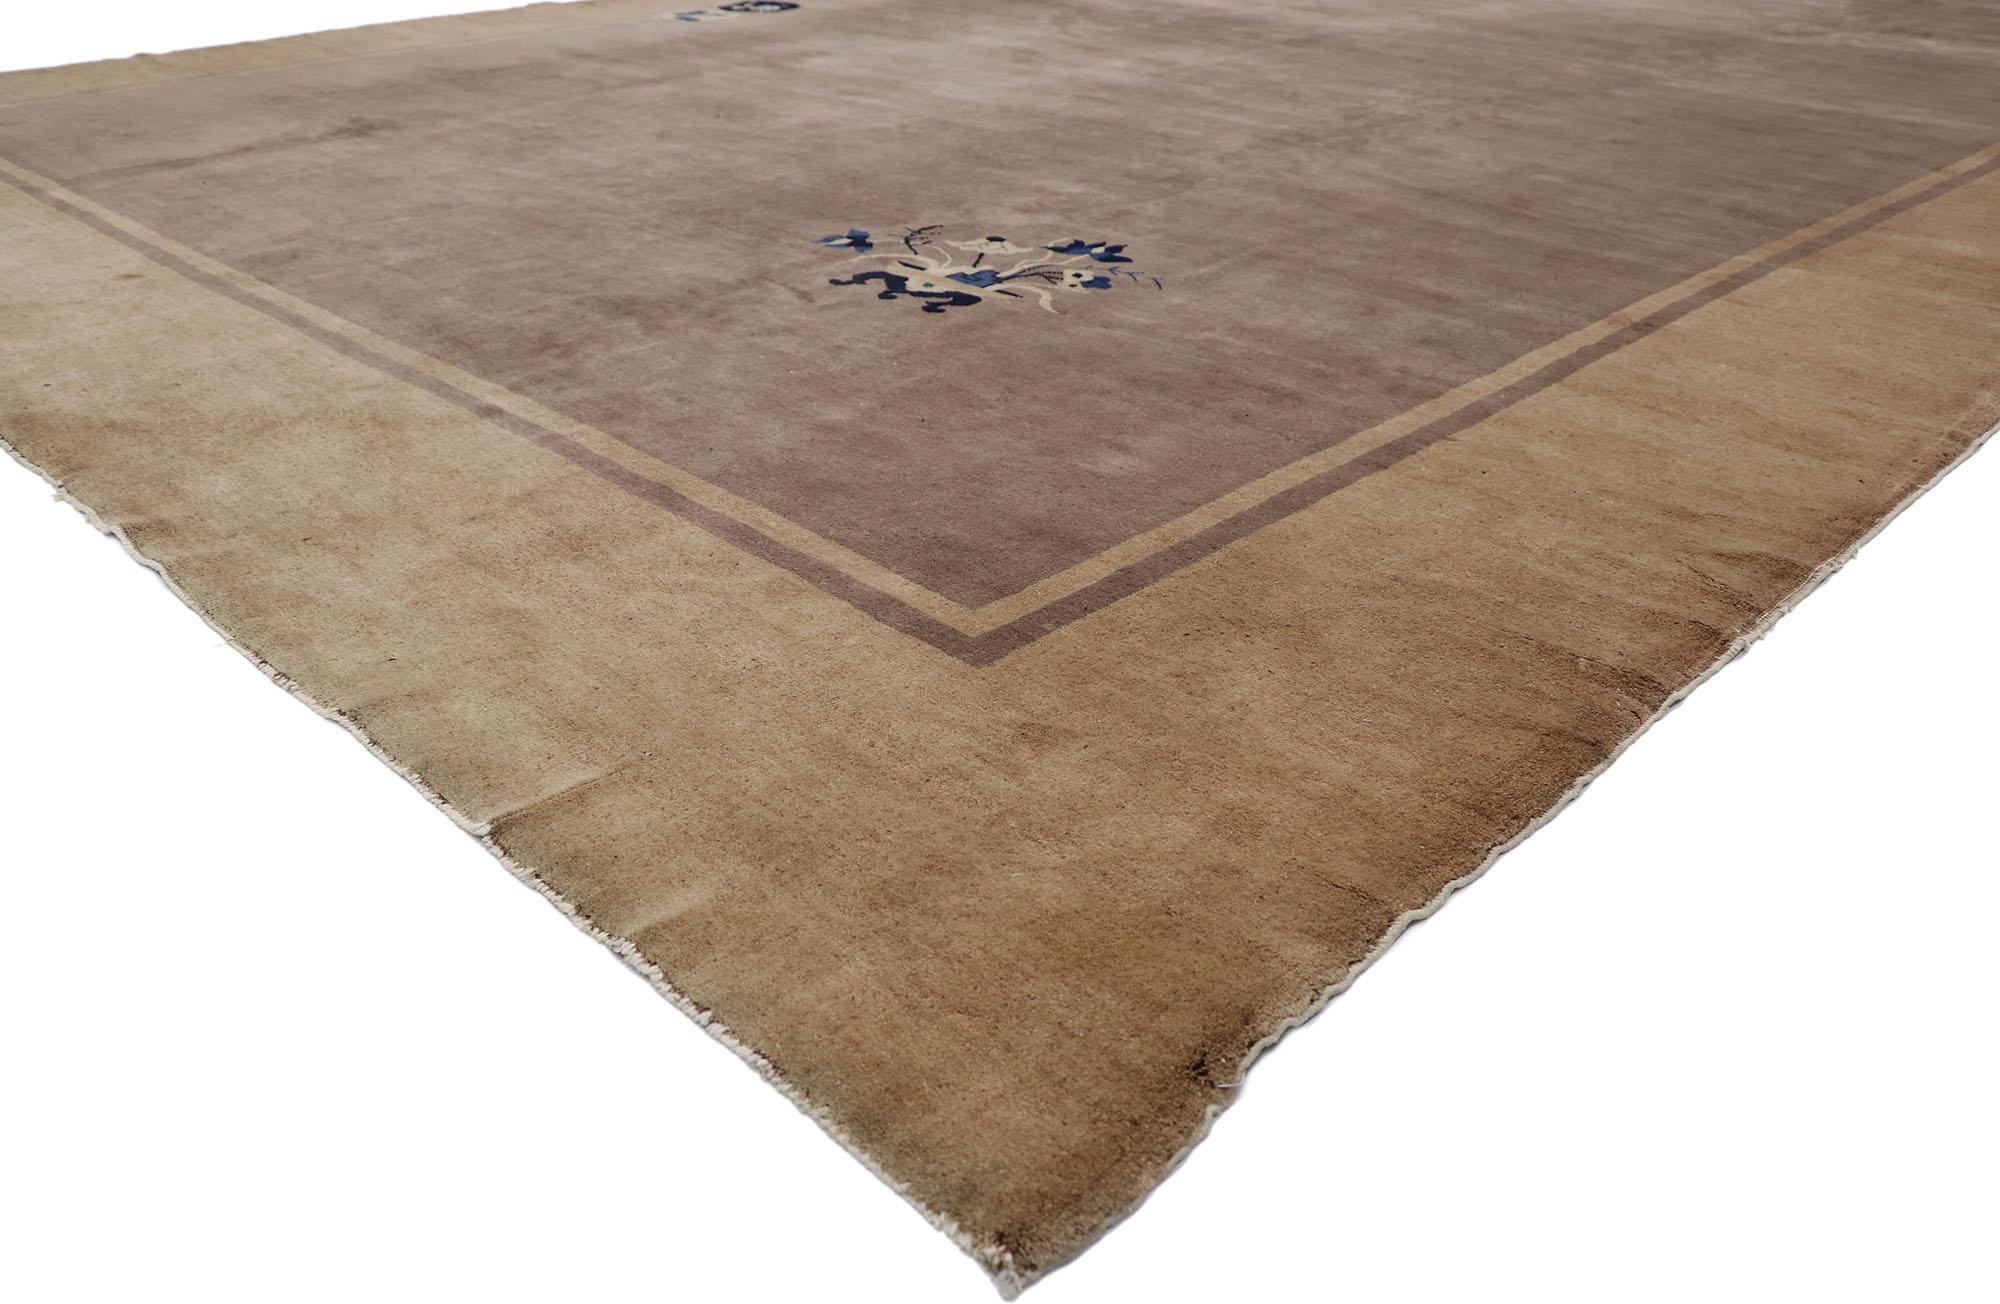 ?78081 Distressed Antique Chinese Peking rug with Minimalist Style 12'01 x 19'01. ??With its effortless beauty and rustic sensibility, this hand-knotted wool distressed antique Chinese Peking rug will take on a curated lived-in look that feels